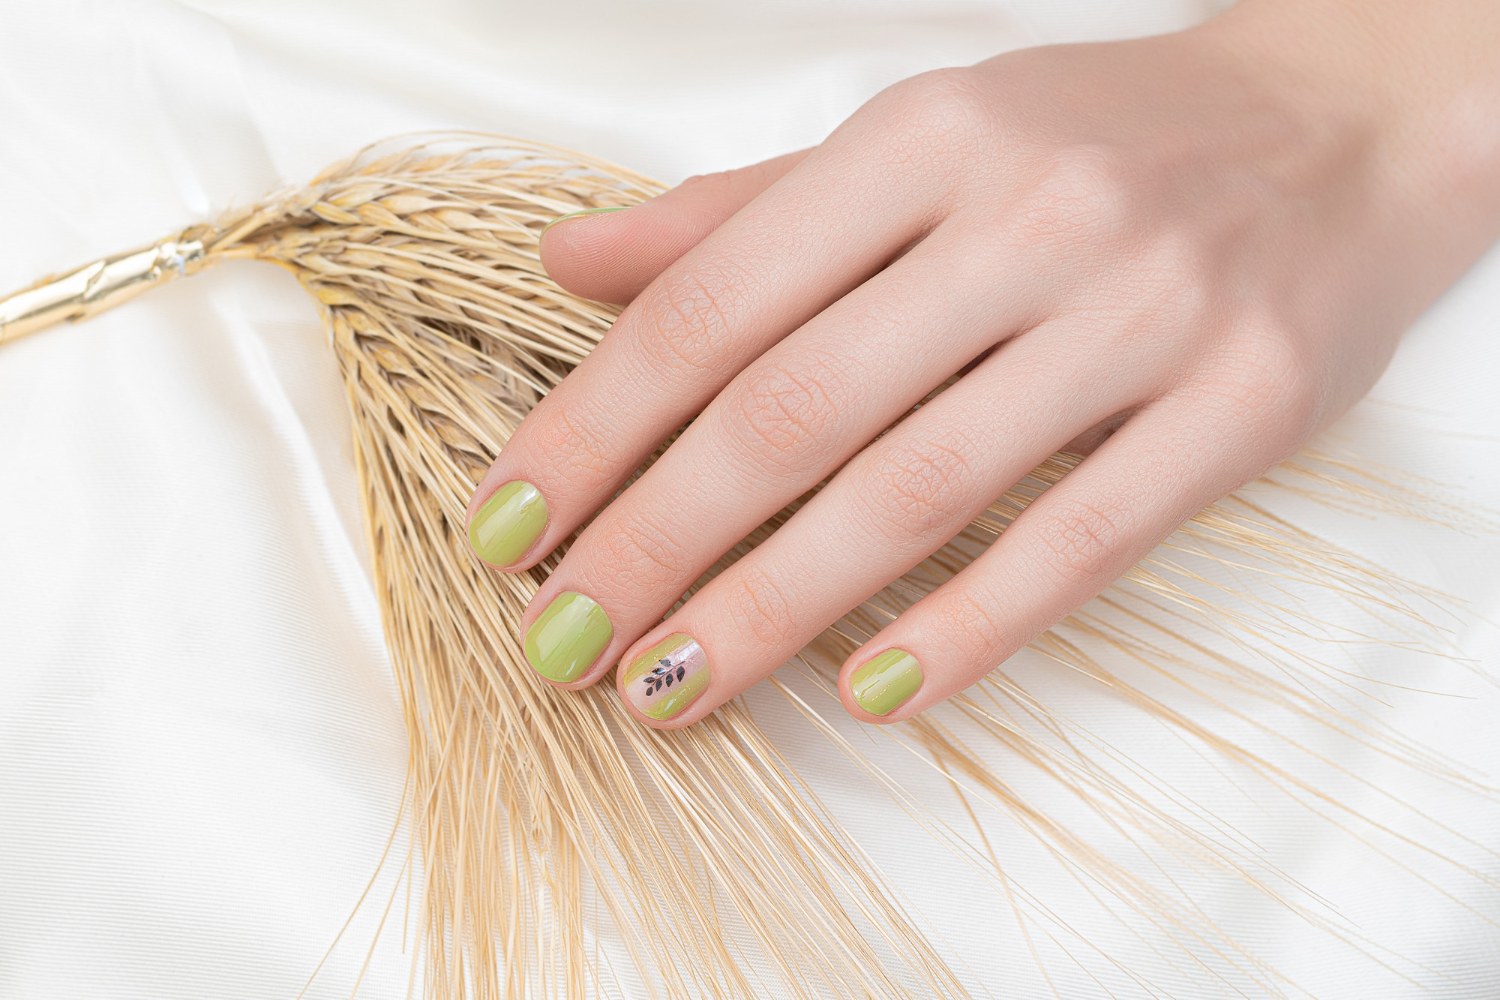 green-nail-design-female-hand-with-glitter-manicure